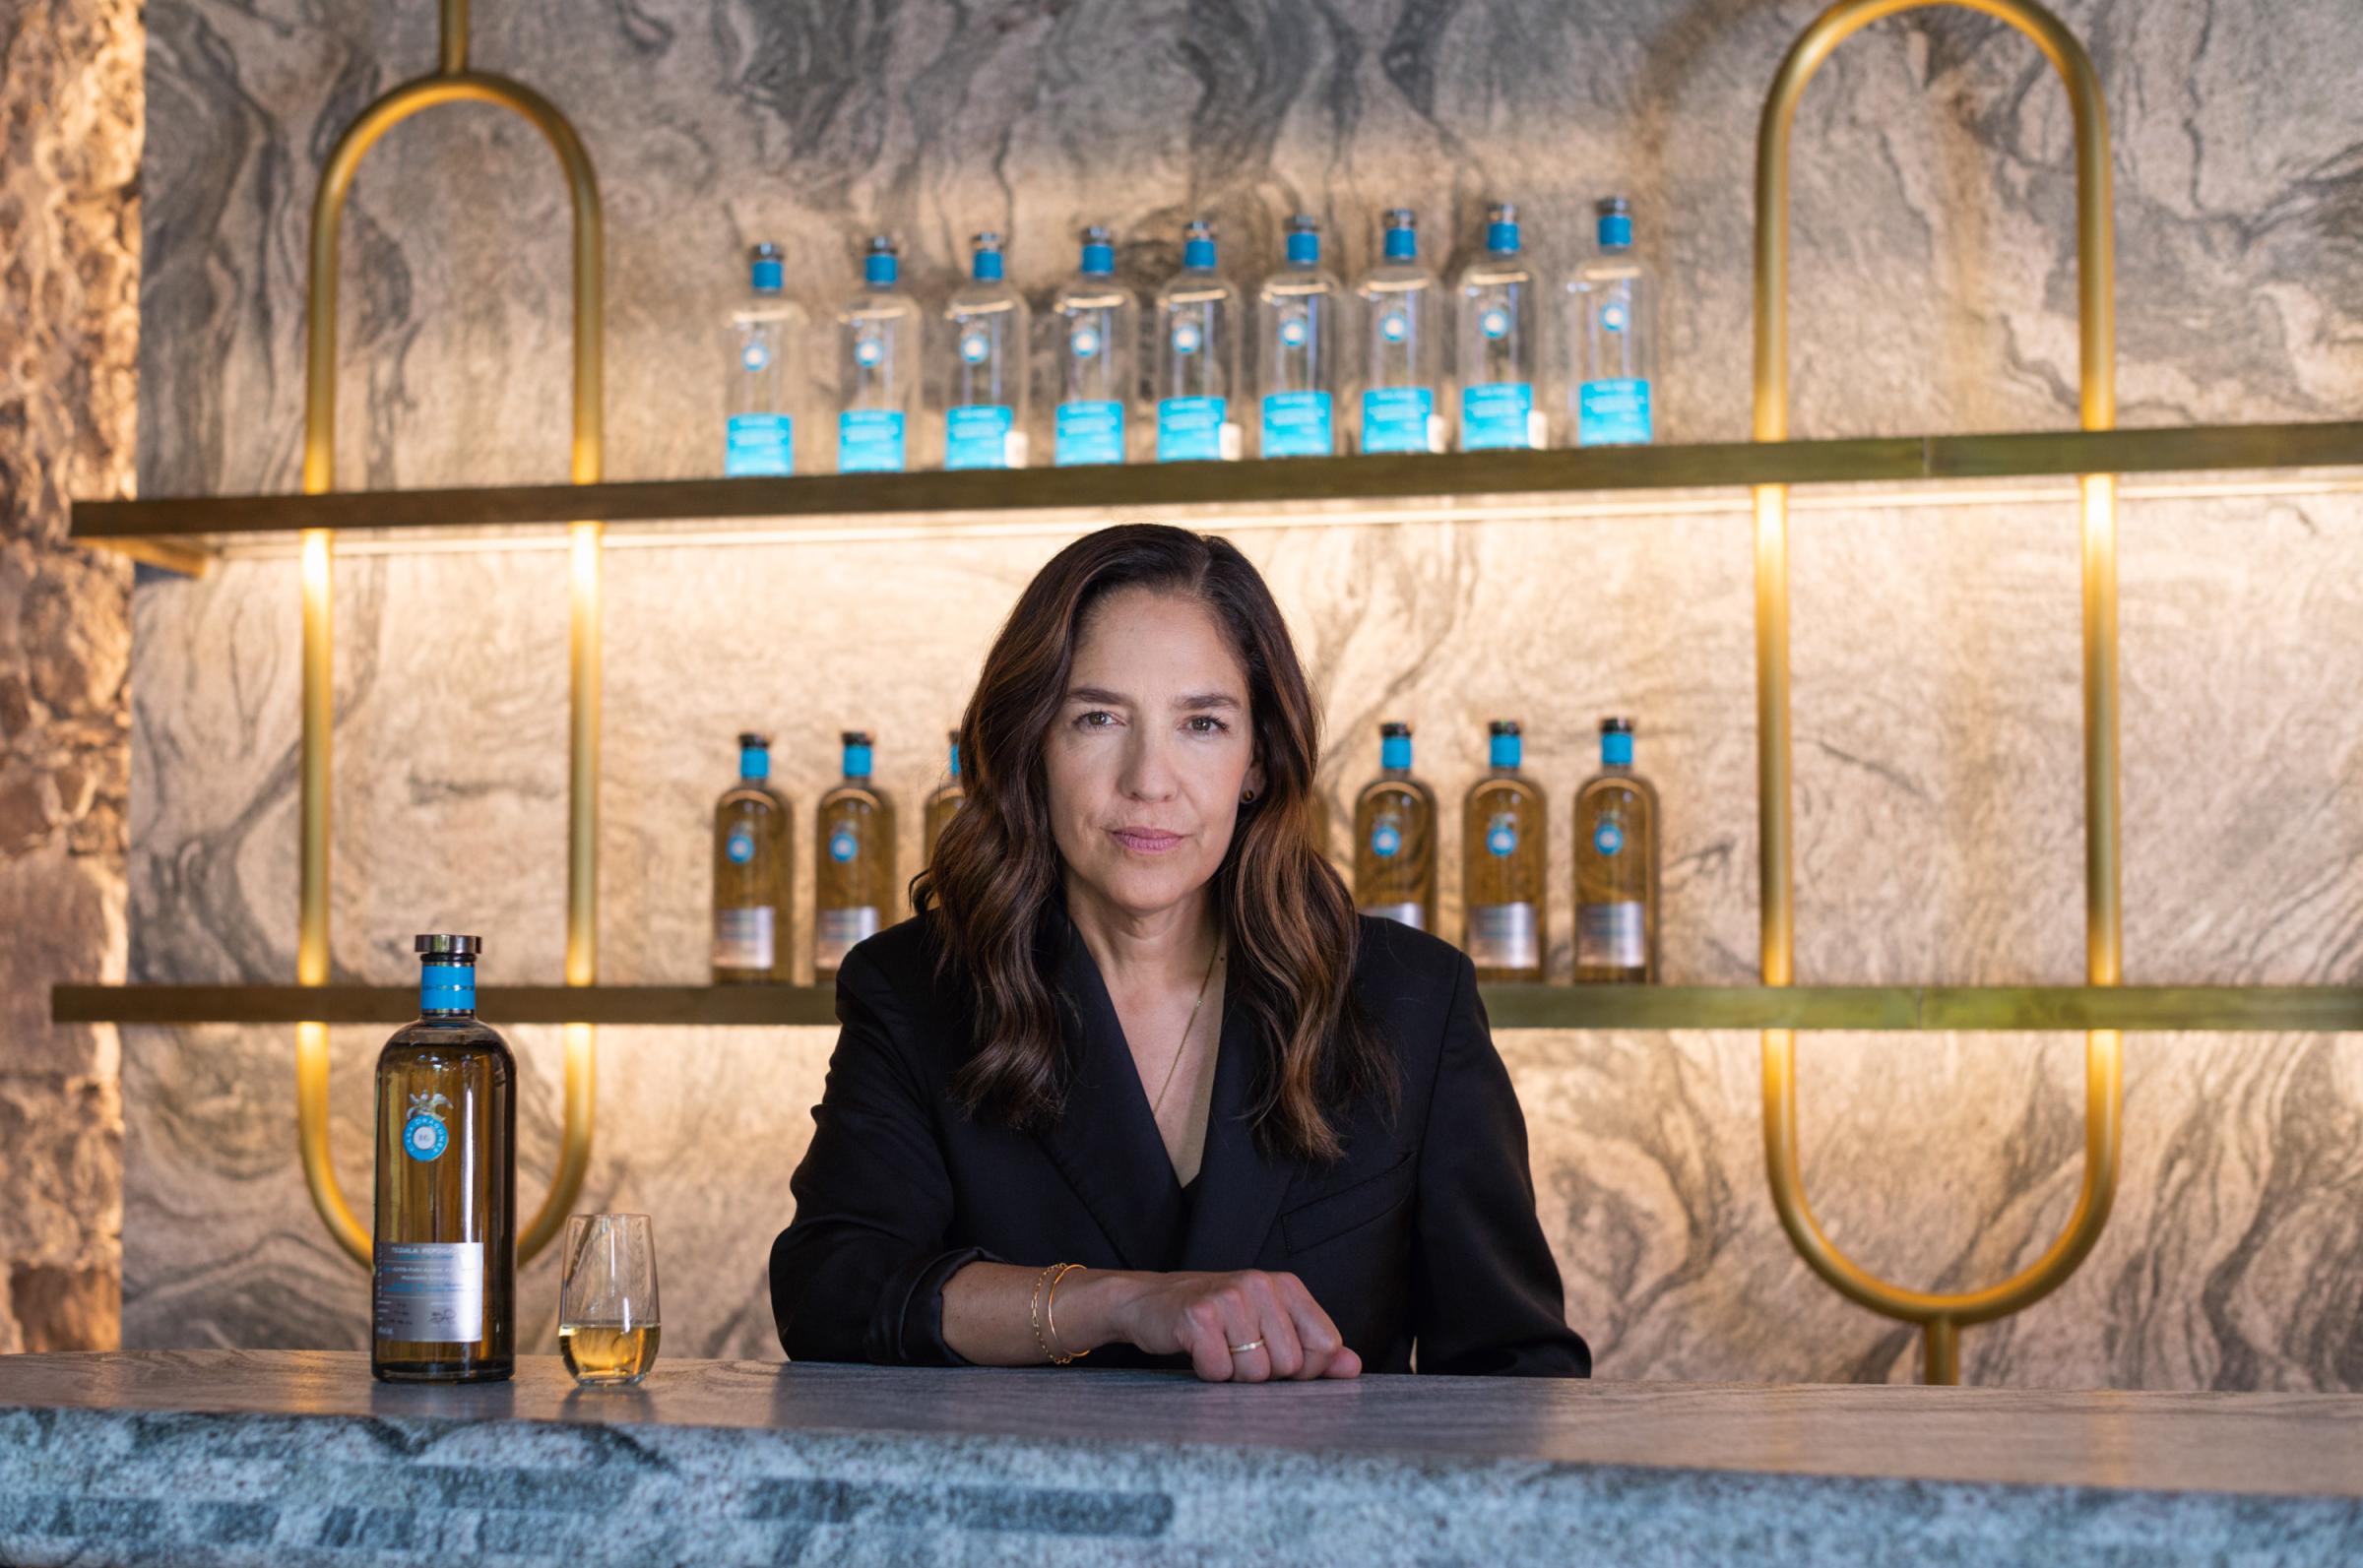  New York Times - The Spirit Behind High-End Tequila - Bertha González Nieves, Mexican businesswoman and CEO of...